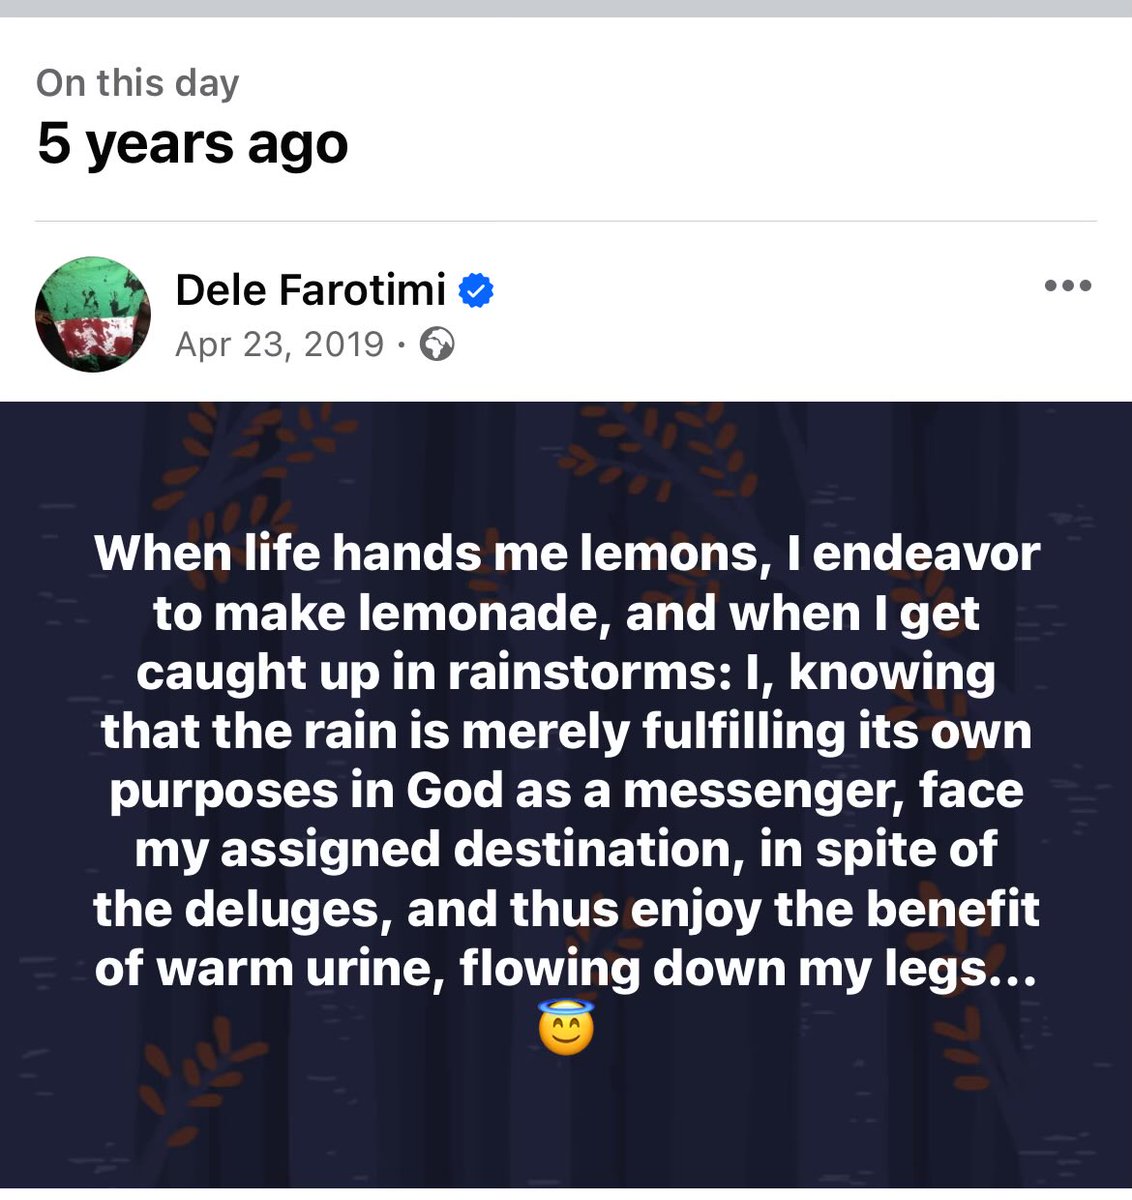 When life hands me lemons, I endeavor to make lemonade, and when I get caught up in rainstorms: I, knowing that the rain is merely fulfilling its own purposes in God as a messenger, face my assigned destination, in spite of the deluges..